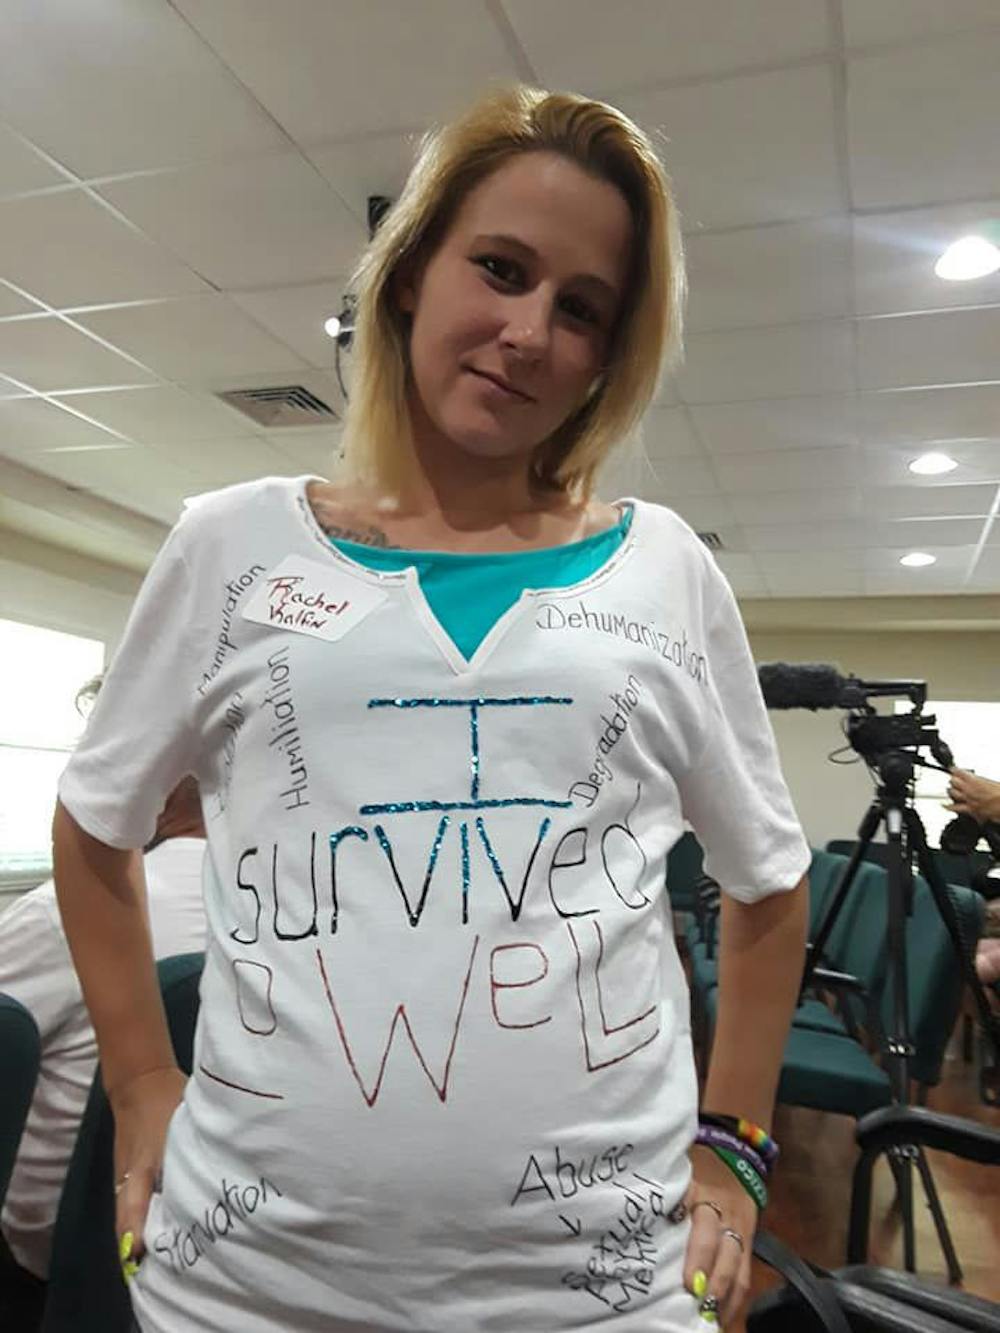 <p><span id="docs-internal-guid-265fb168-7fff-e0c2-1fbe-5dc7306dacdd"><span>Rachel Kalfin, a former inmate at Lowell Correctional Institution, poses in her “I survived Lowell” shirt. On August 19, she attended a meeting in Ocala with other former inmates to talk to the Department of Justice team about abuses they experienced.</span></span></p>